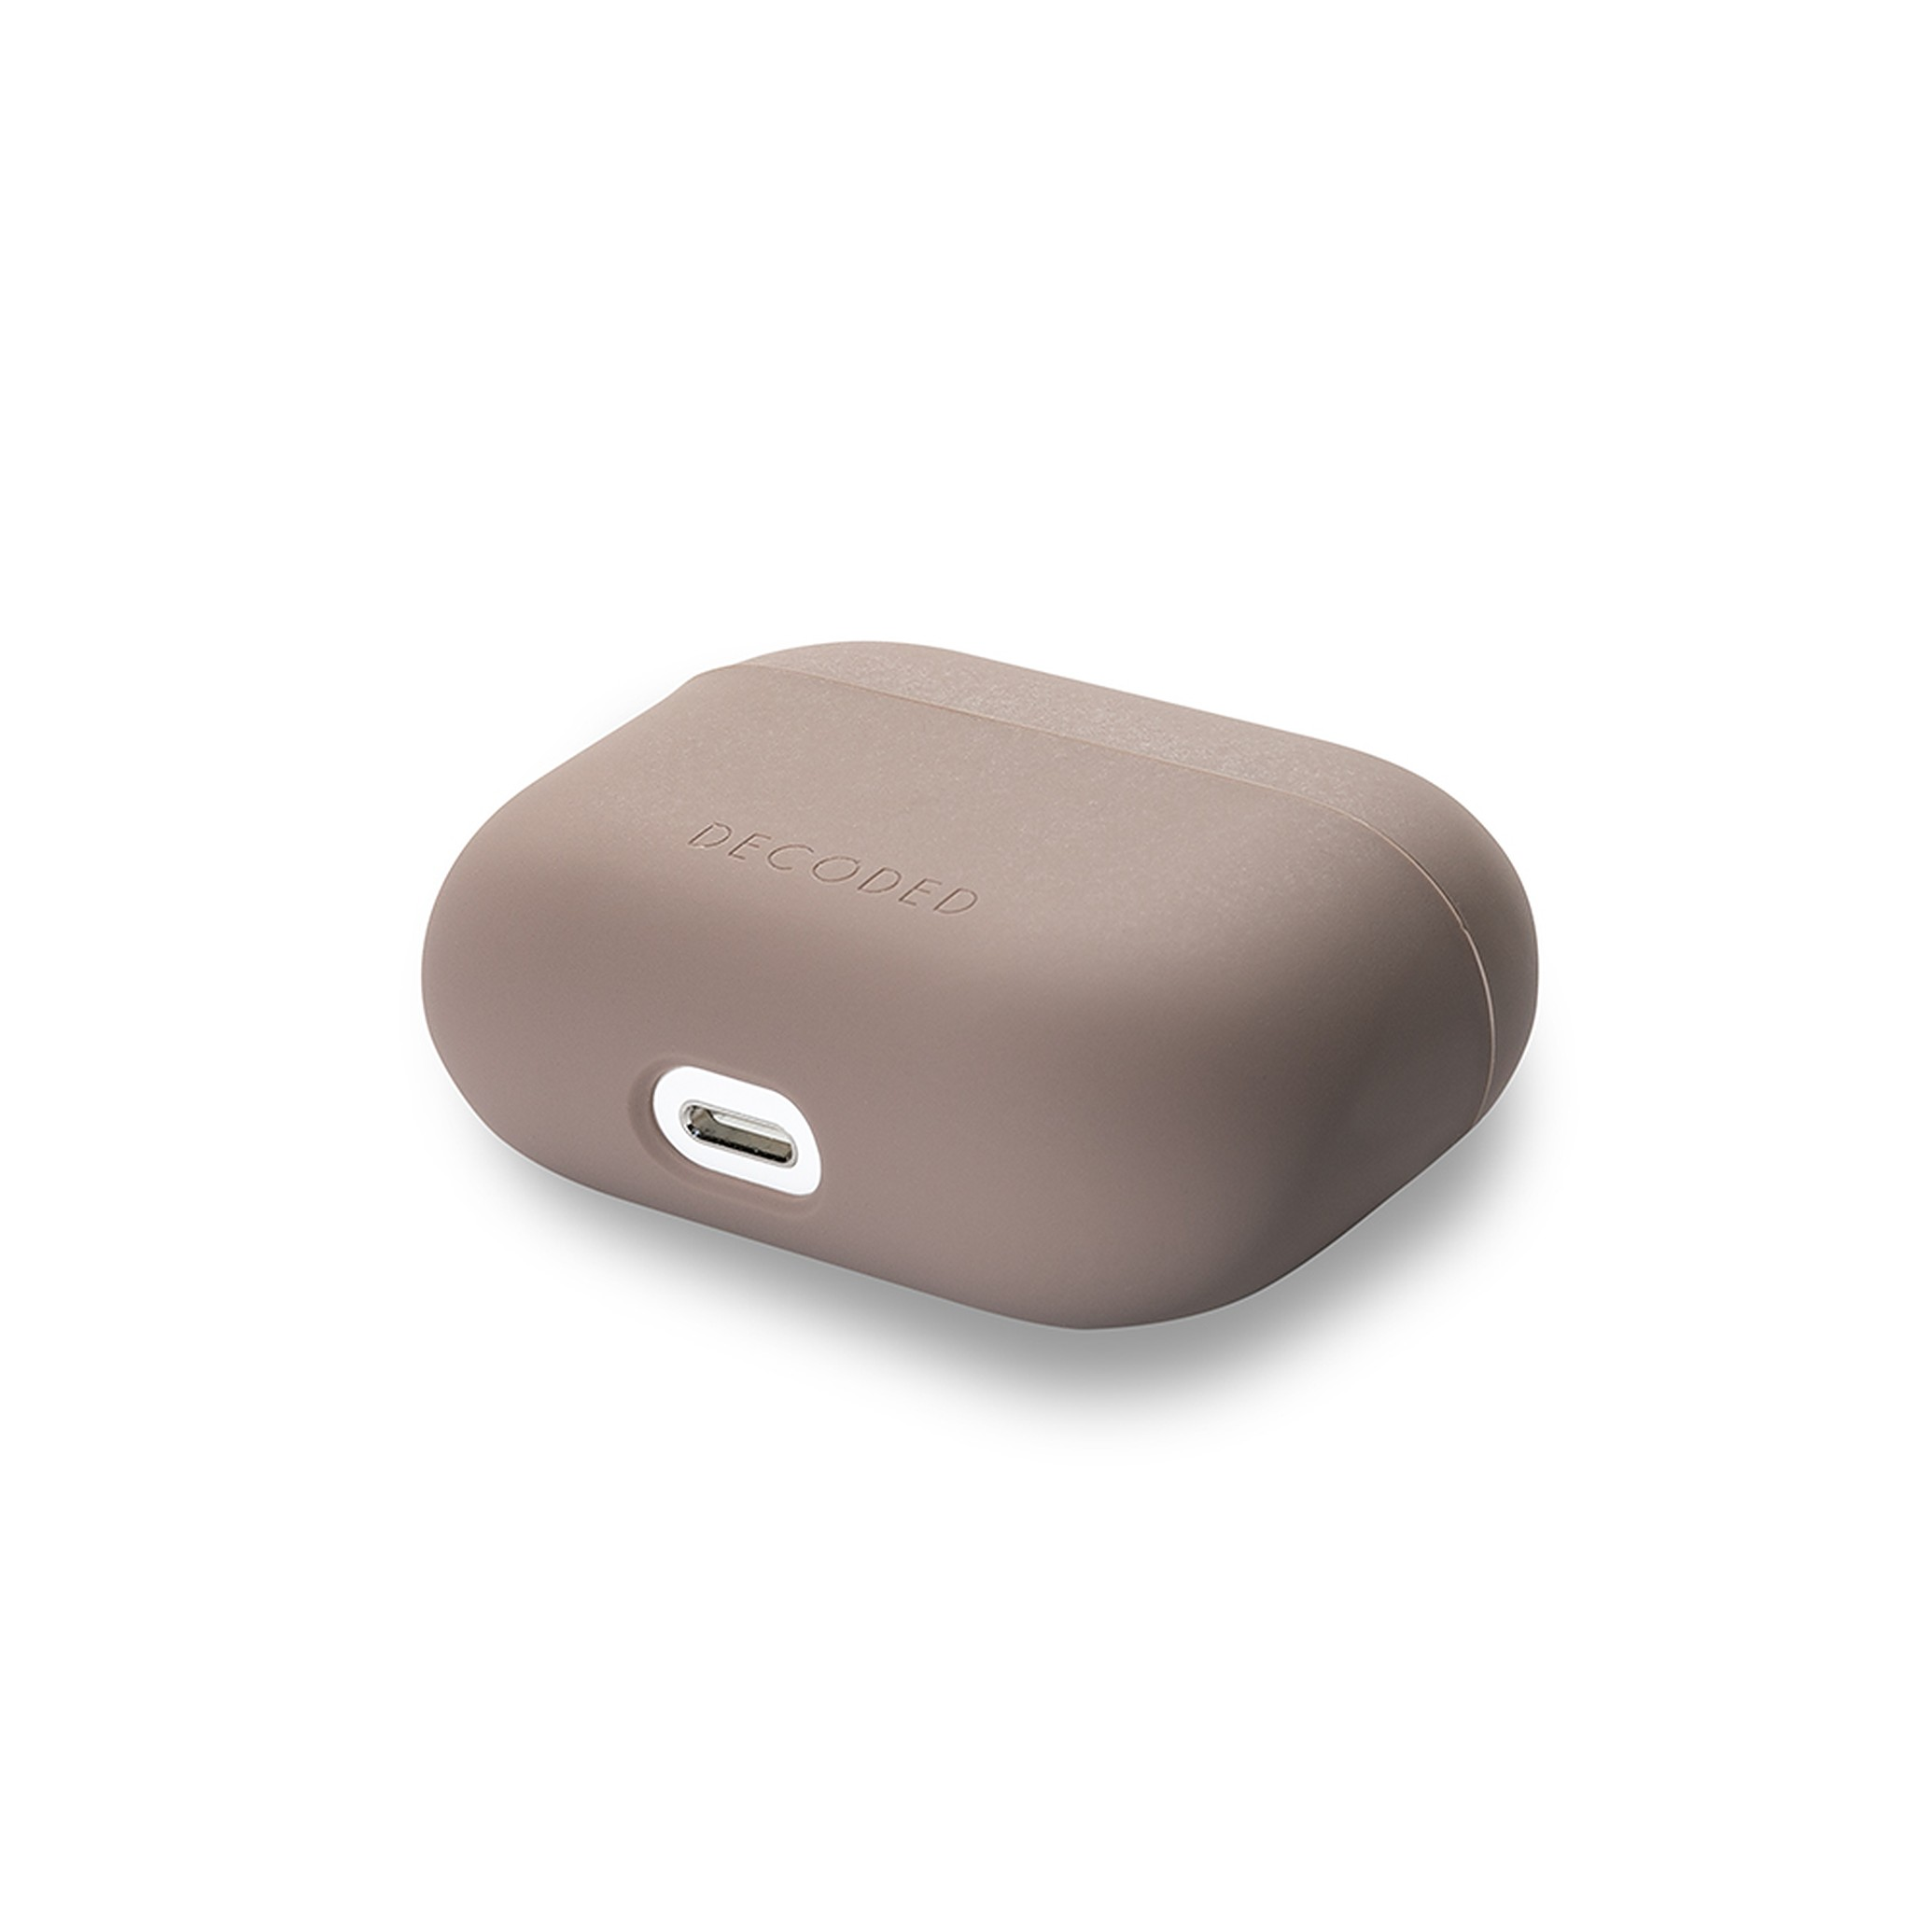 Dark taupe DECODED Aircase, Full Apple, 3, Airpods Cover,